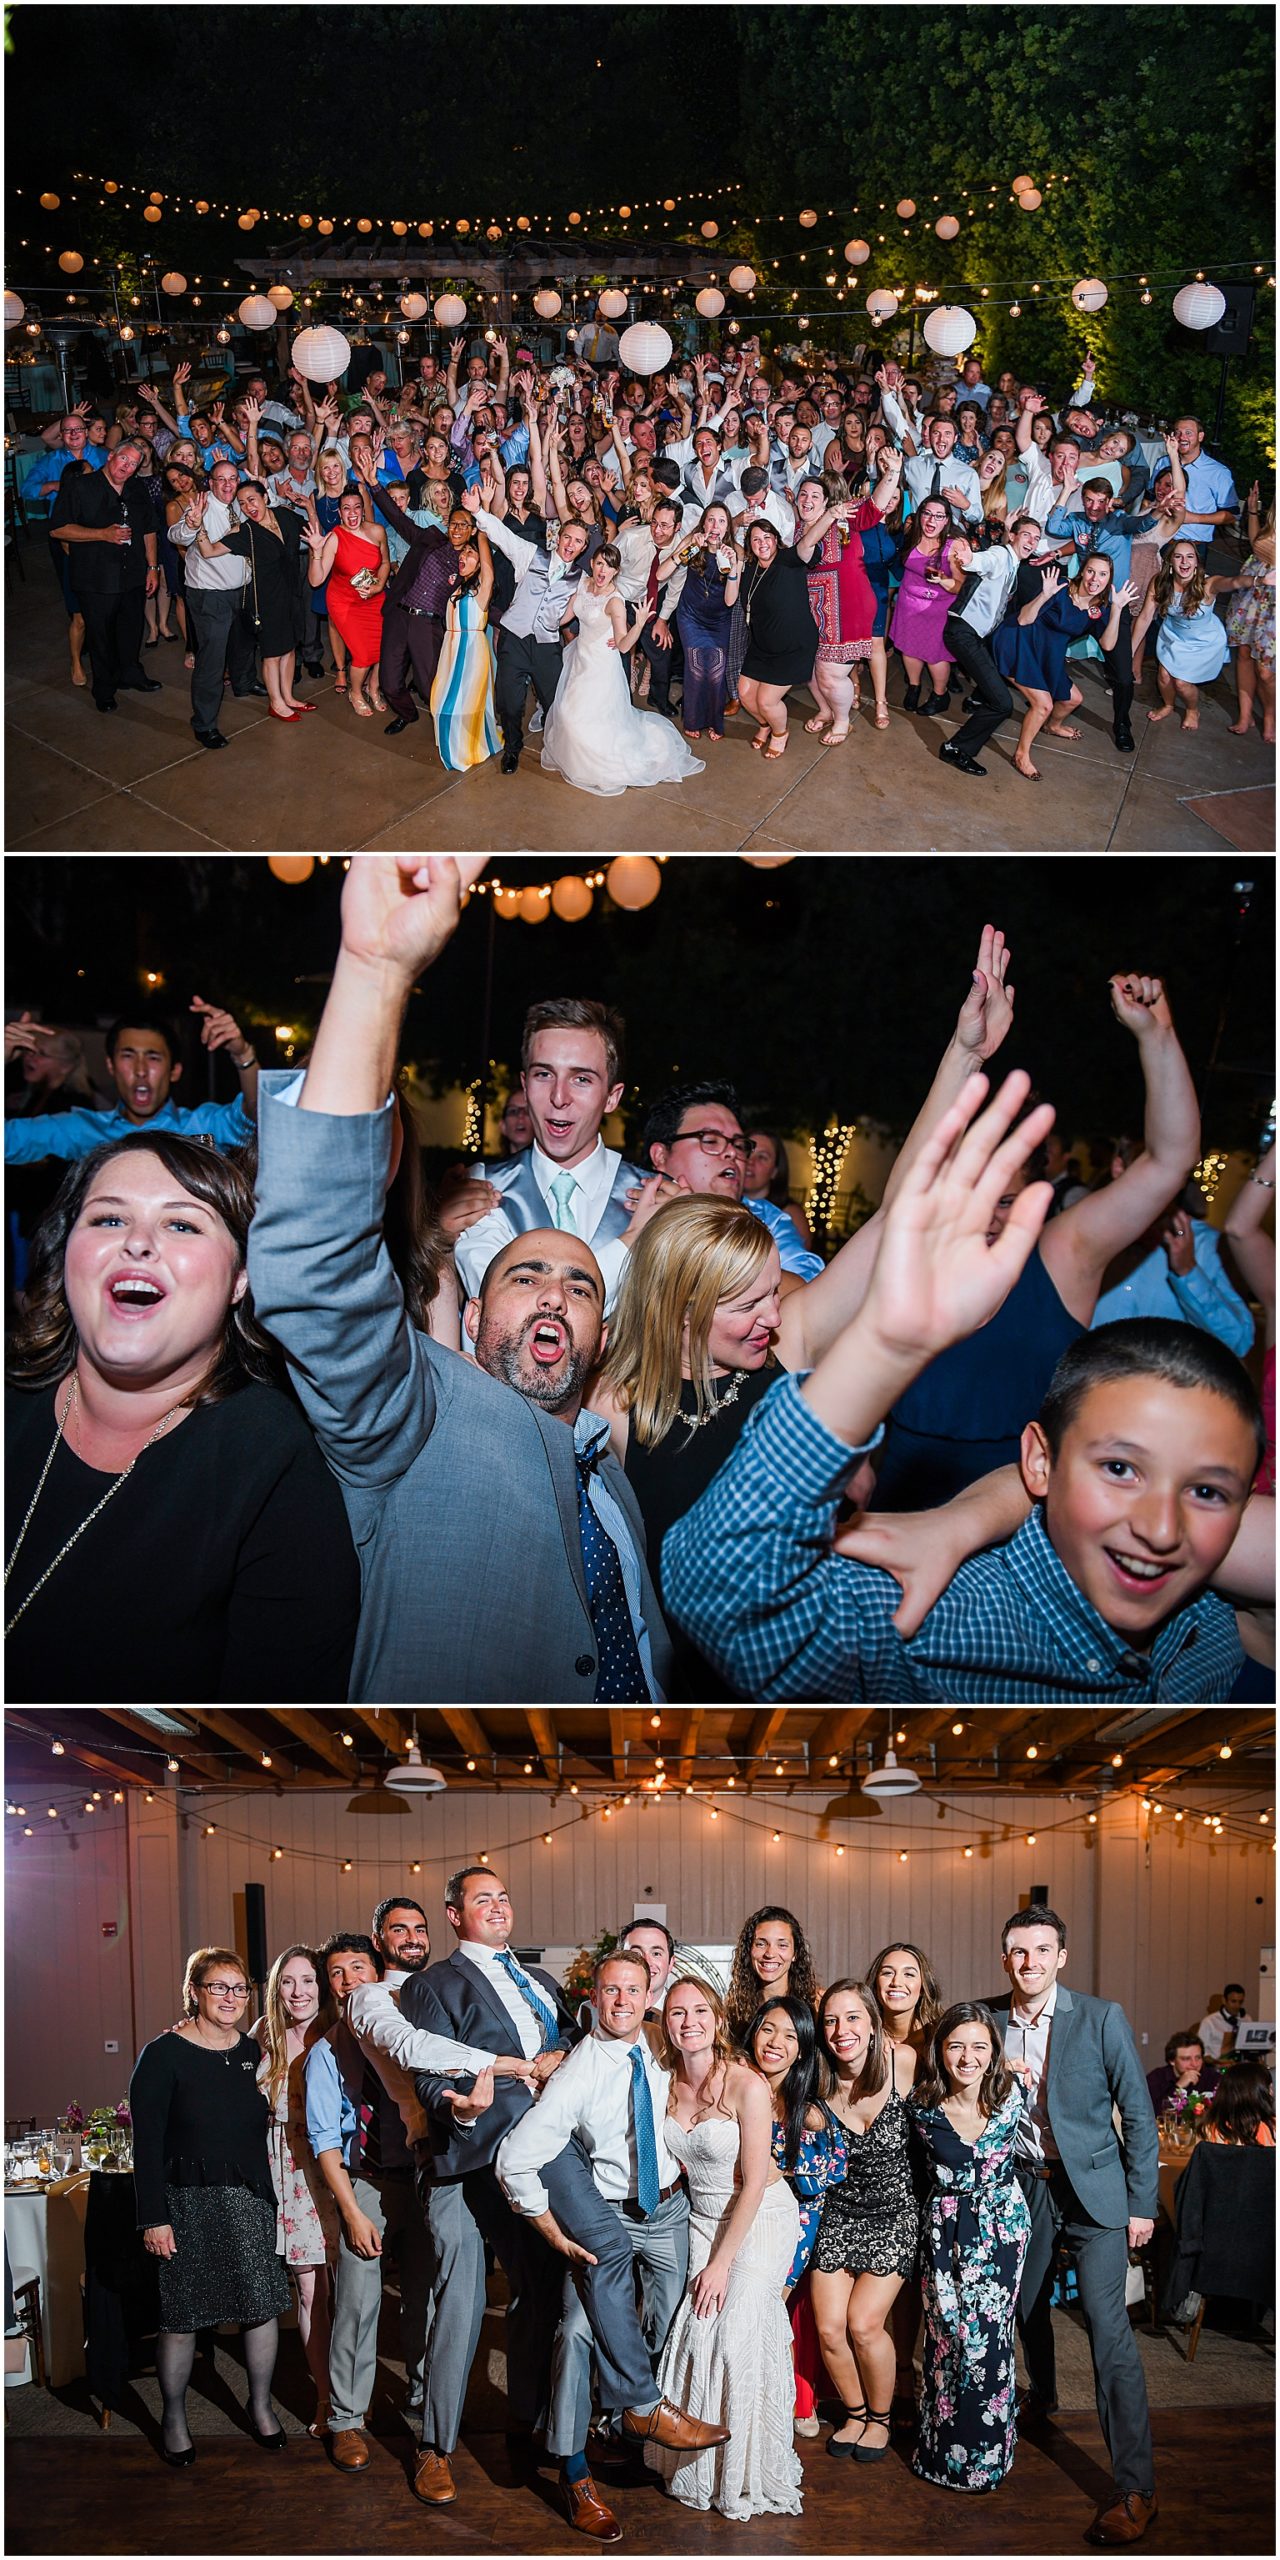 photos of wedding guests having a great time